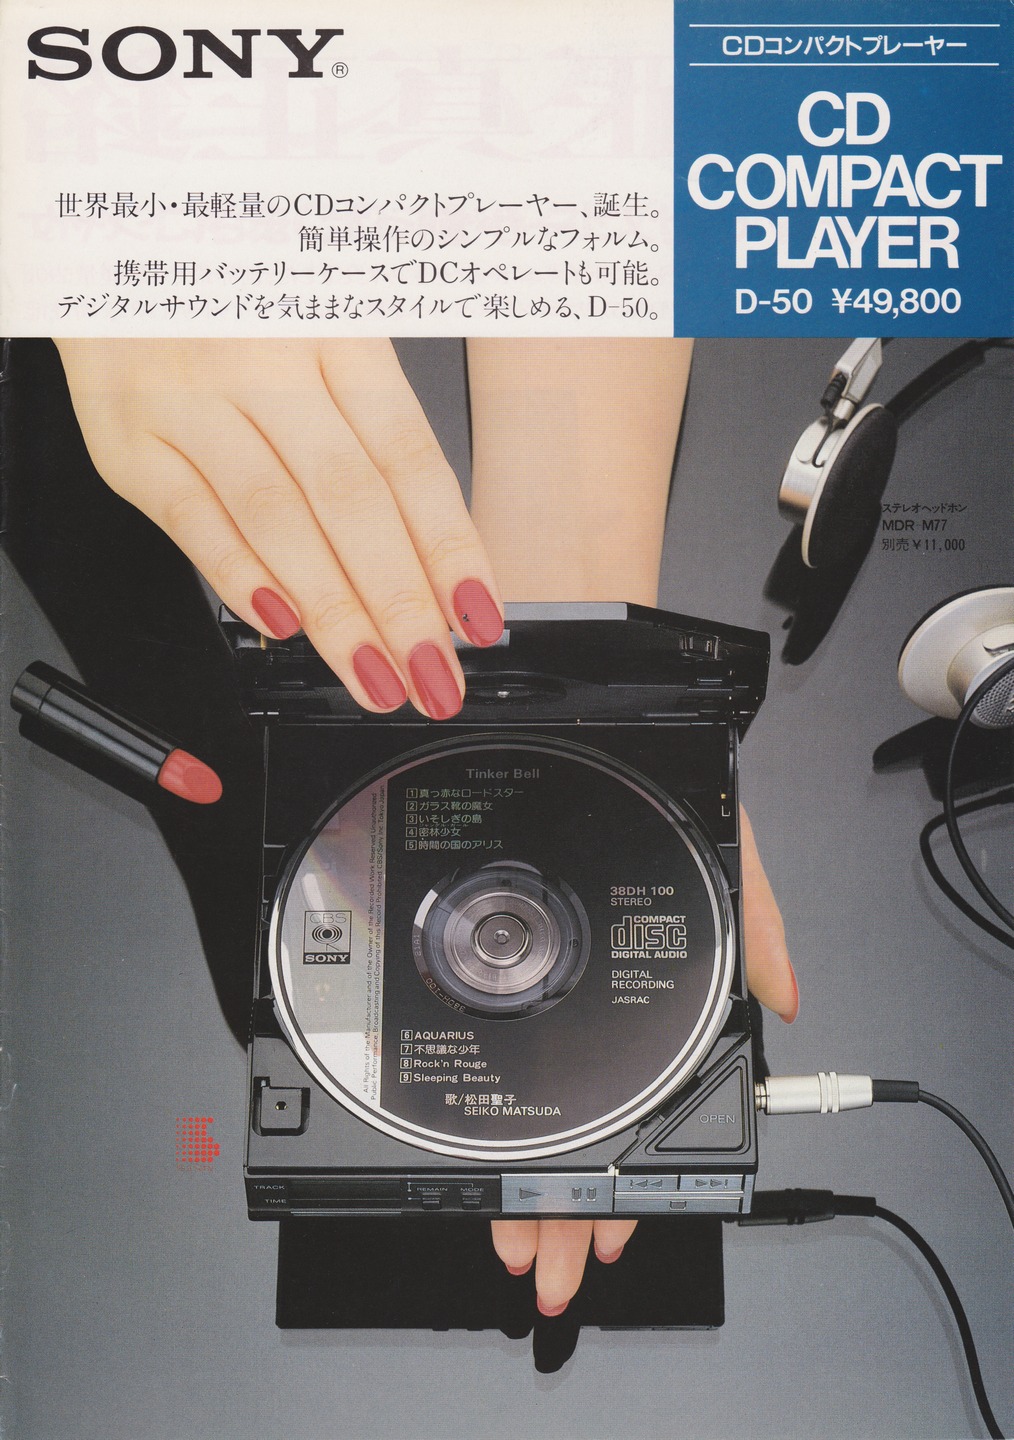 SONY D-50 CD Compact Player コンパクトプレイヤー-